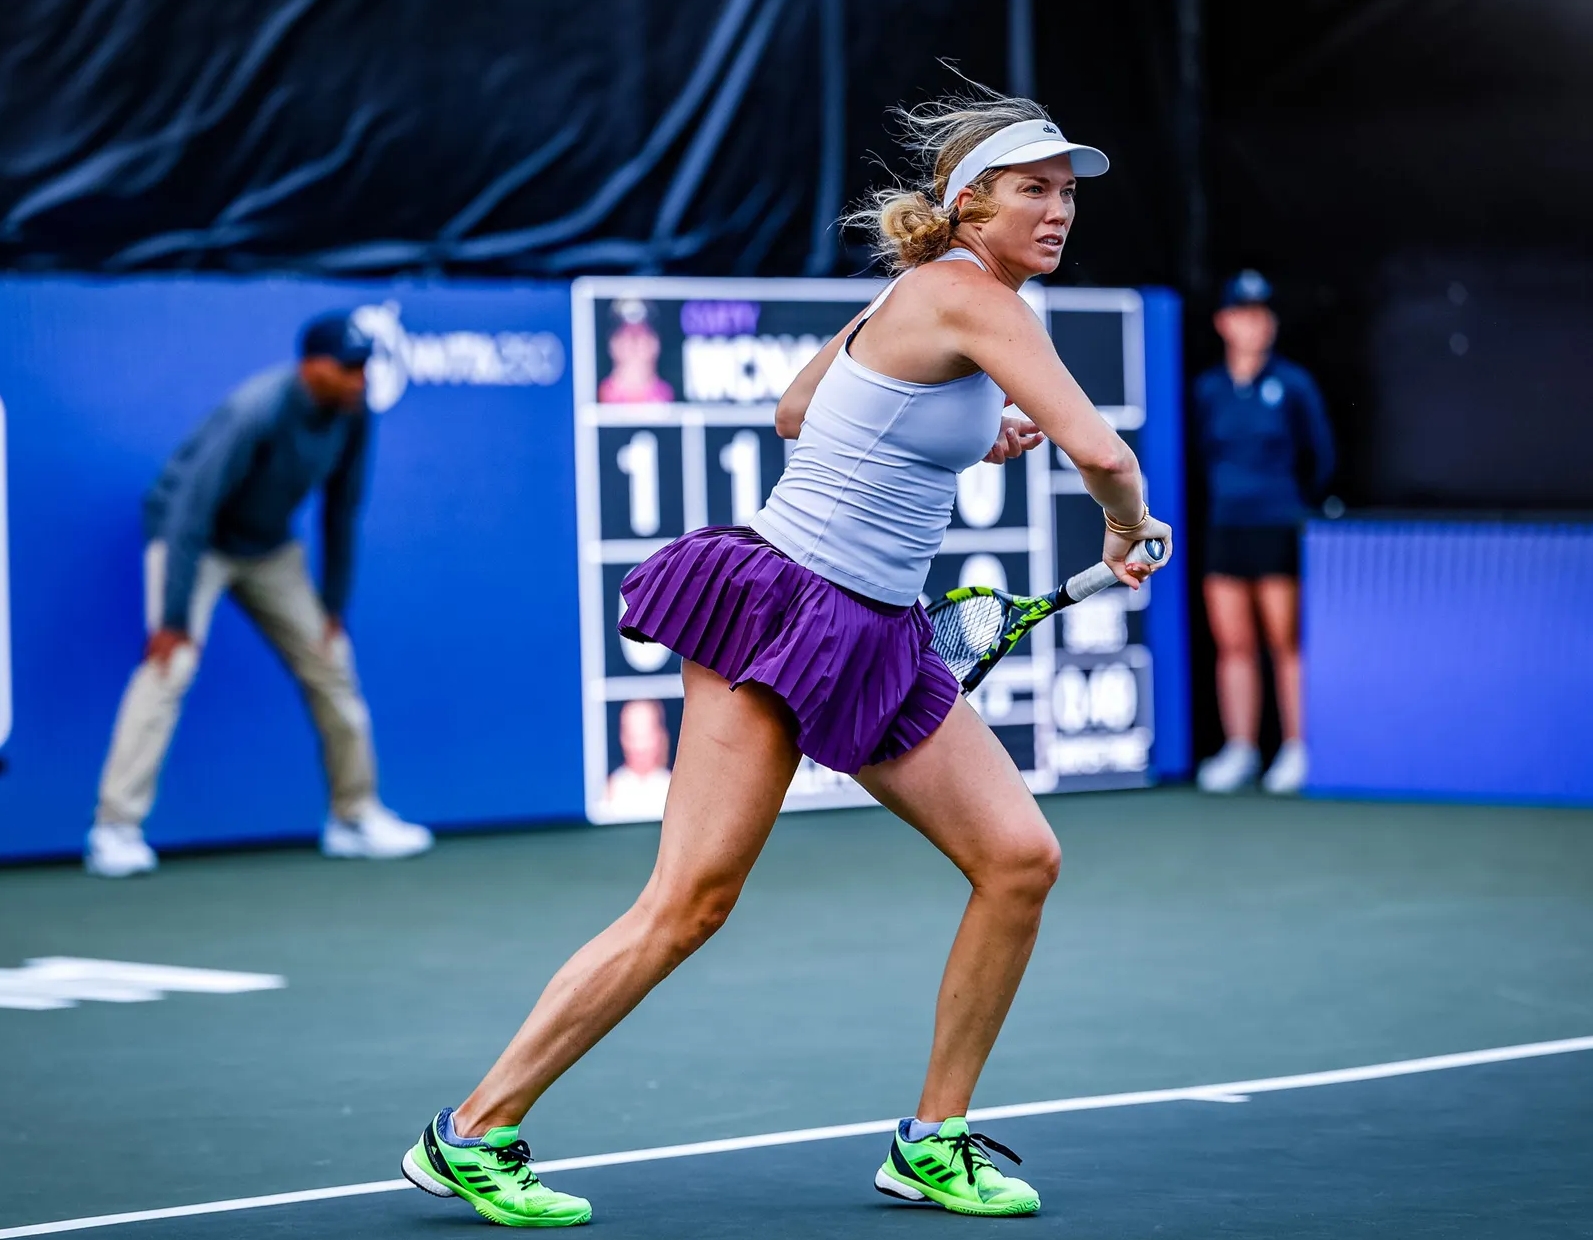 Collins storms into ATX Open quarterfinal